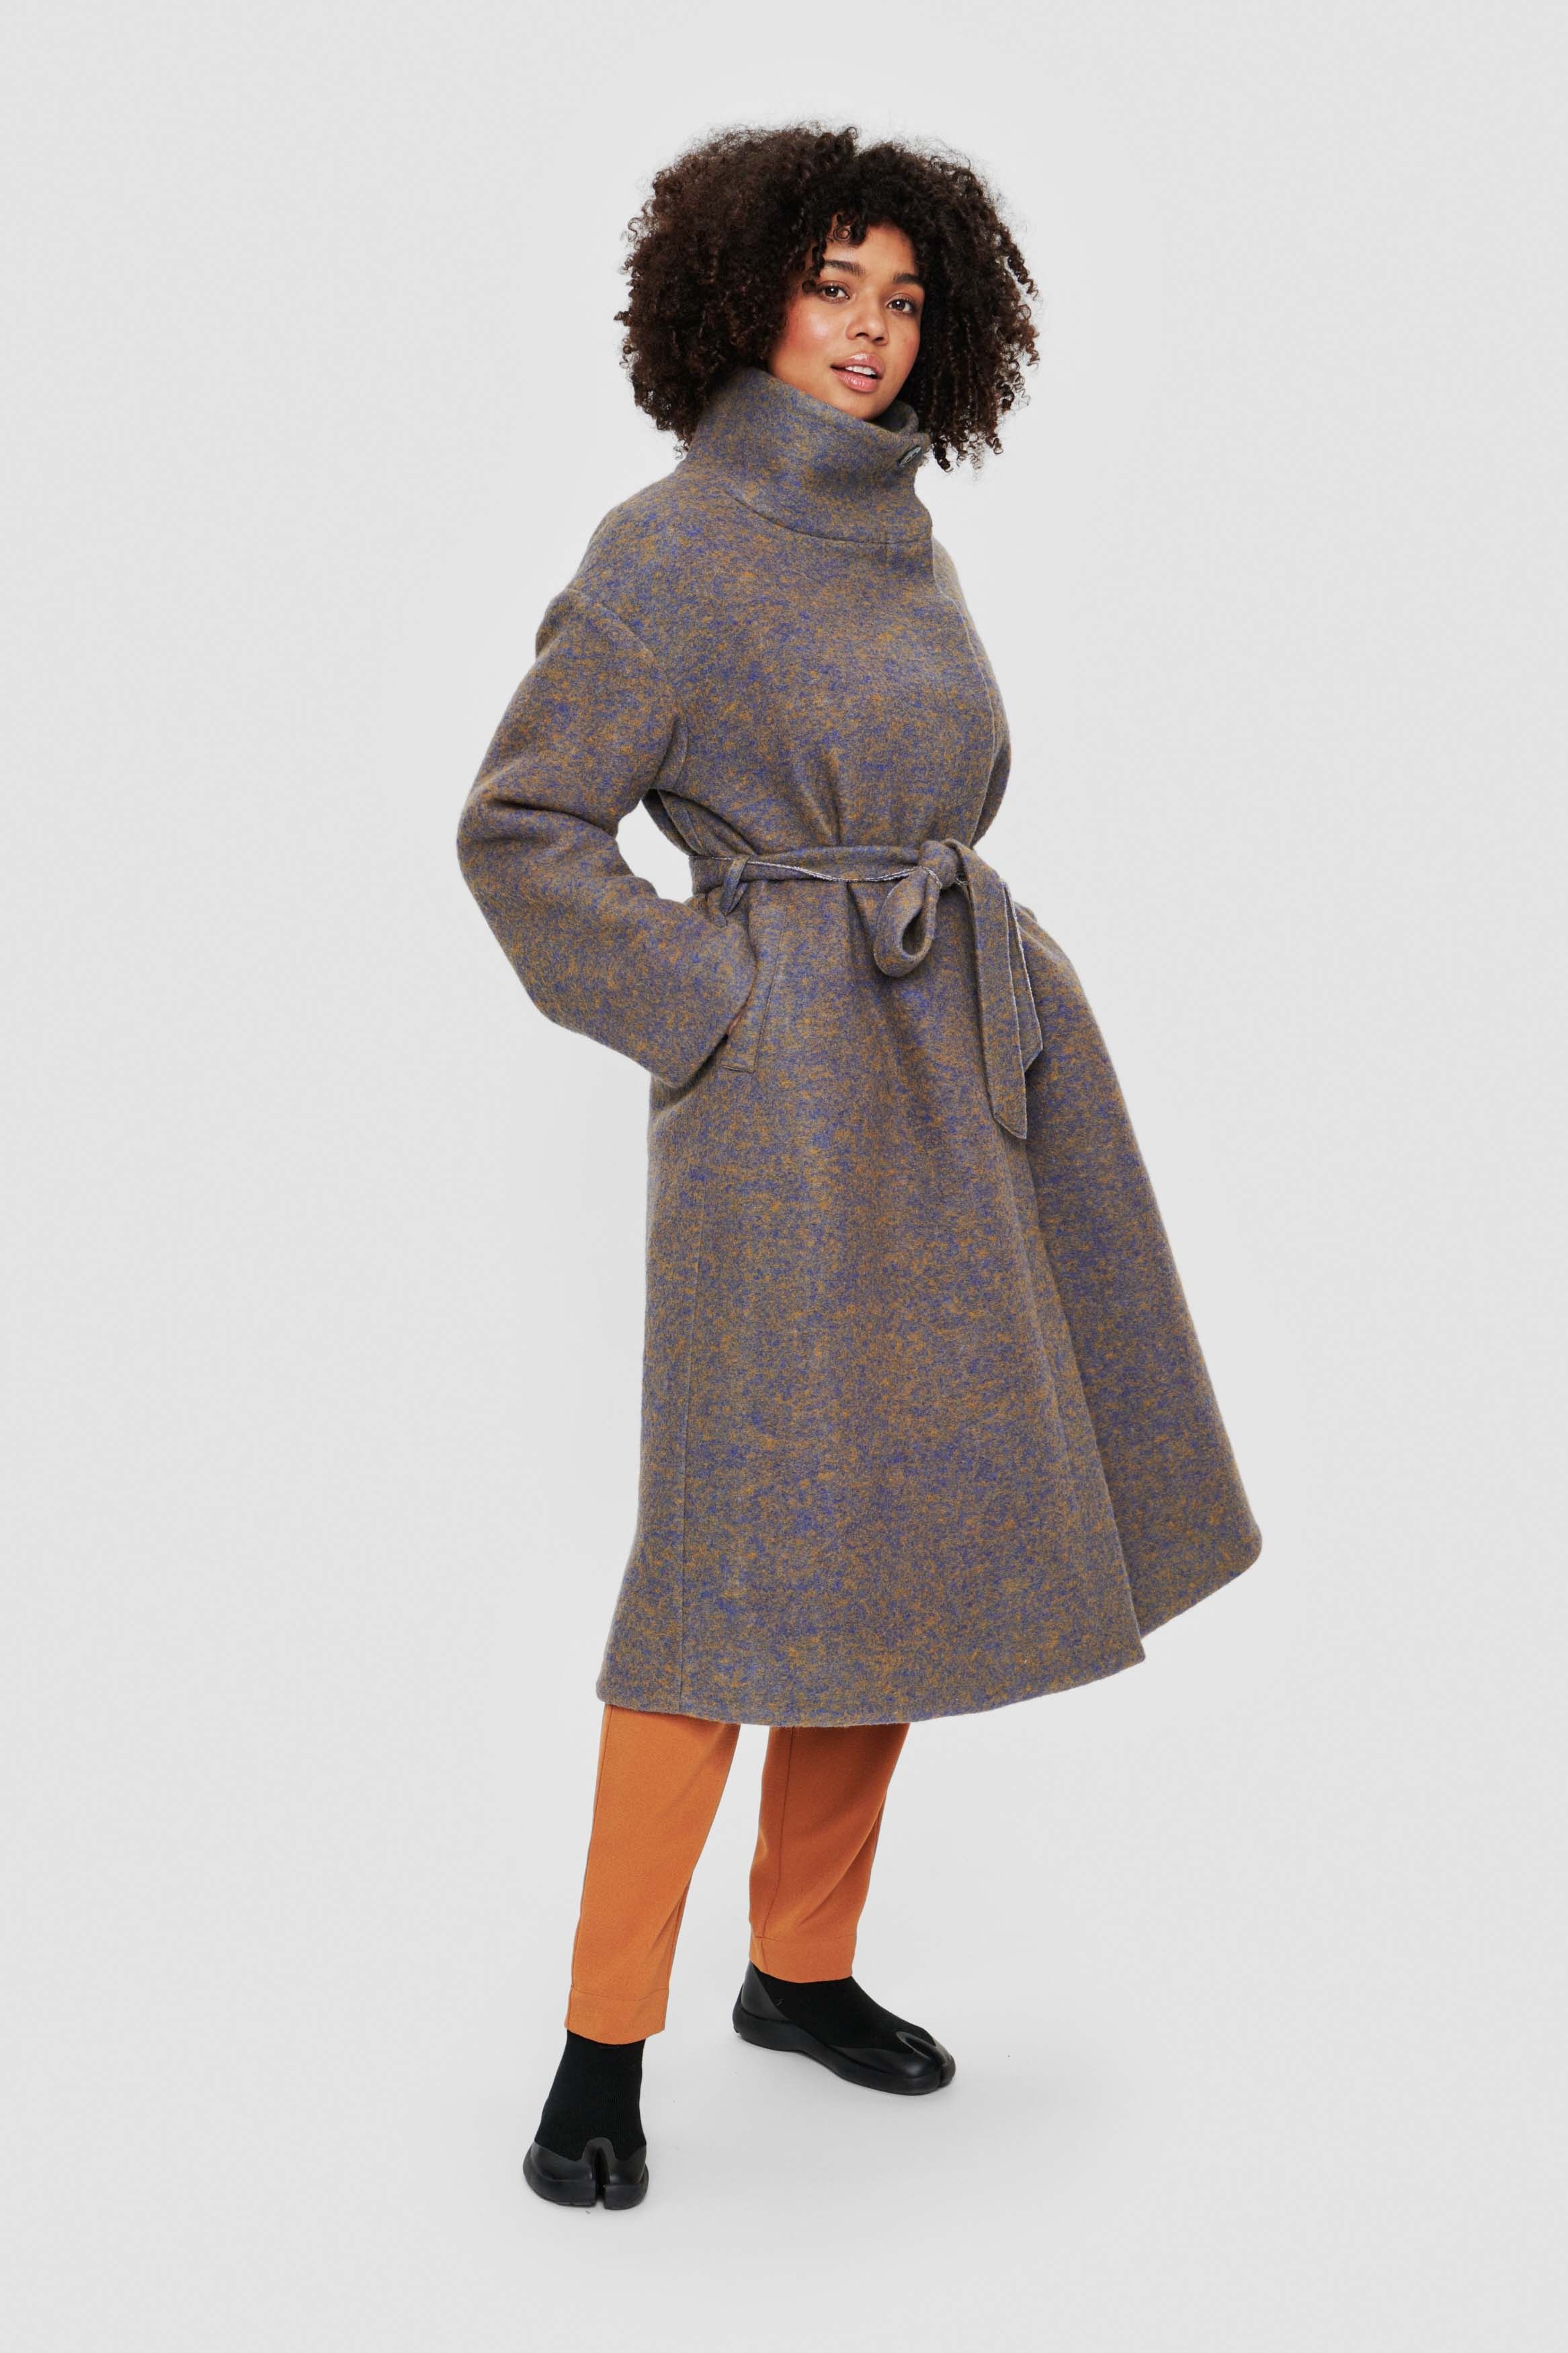 Changeant wool mix coat with collar